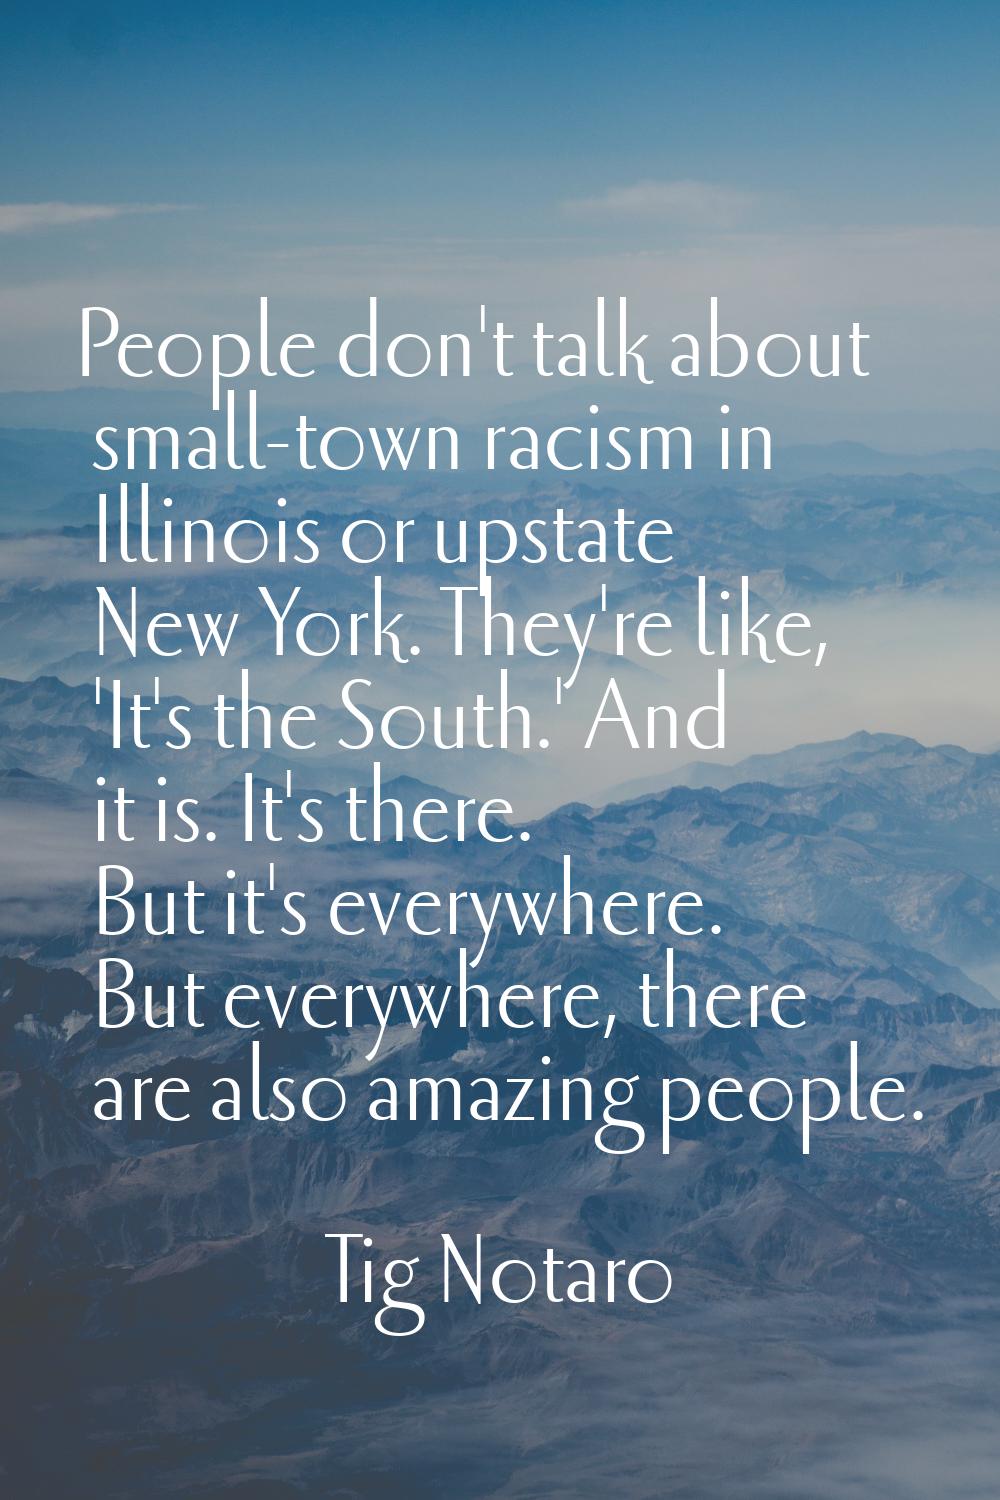 People don't talk about small-town racism in Illinois or upstate New York. They're like, 'It's the 